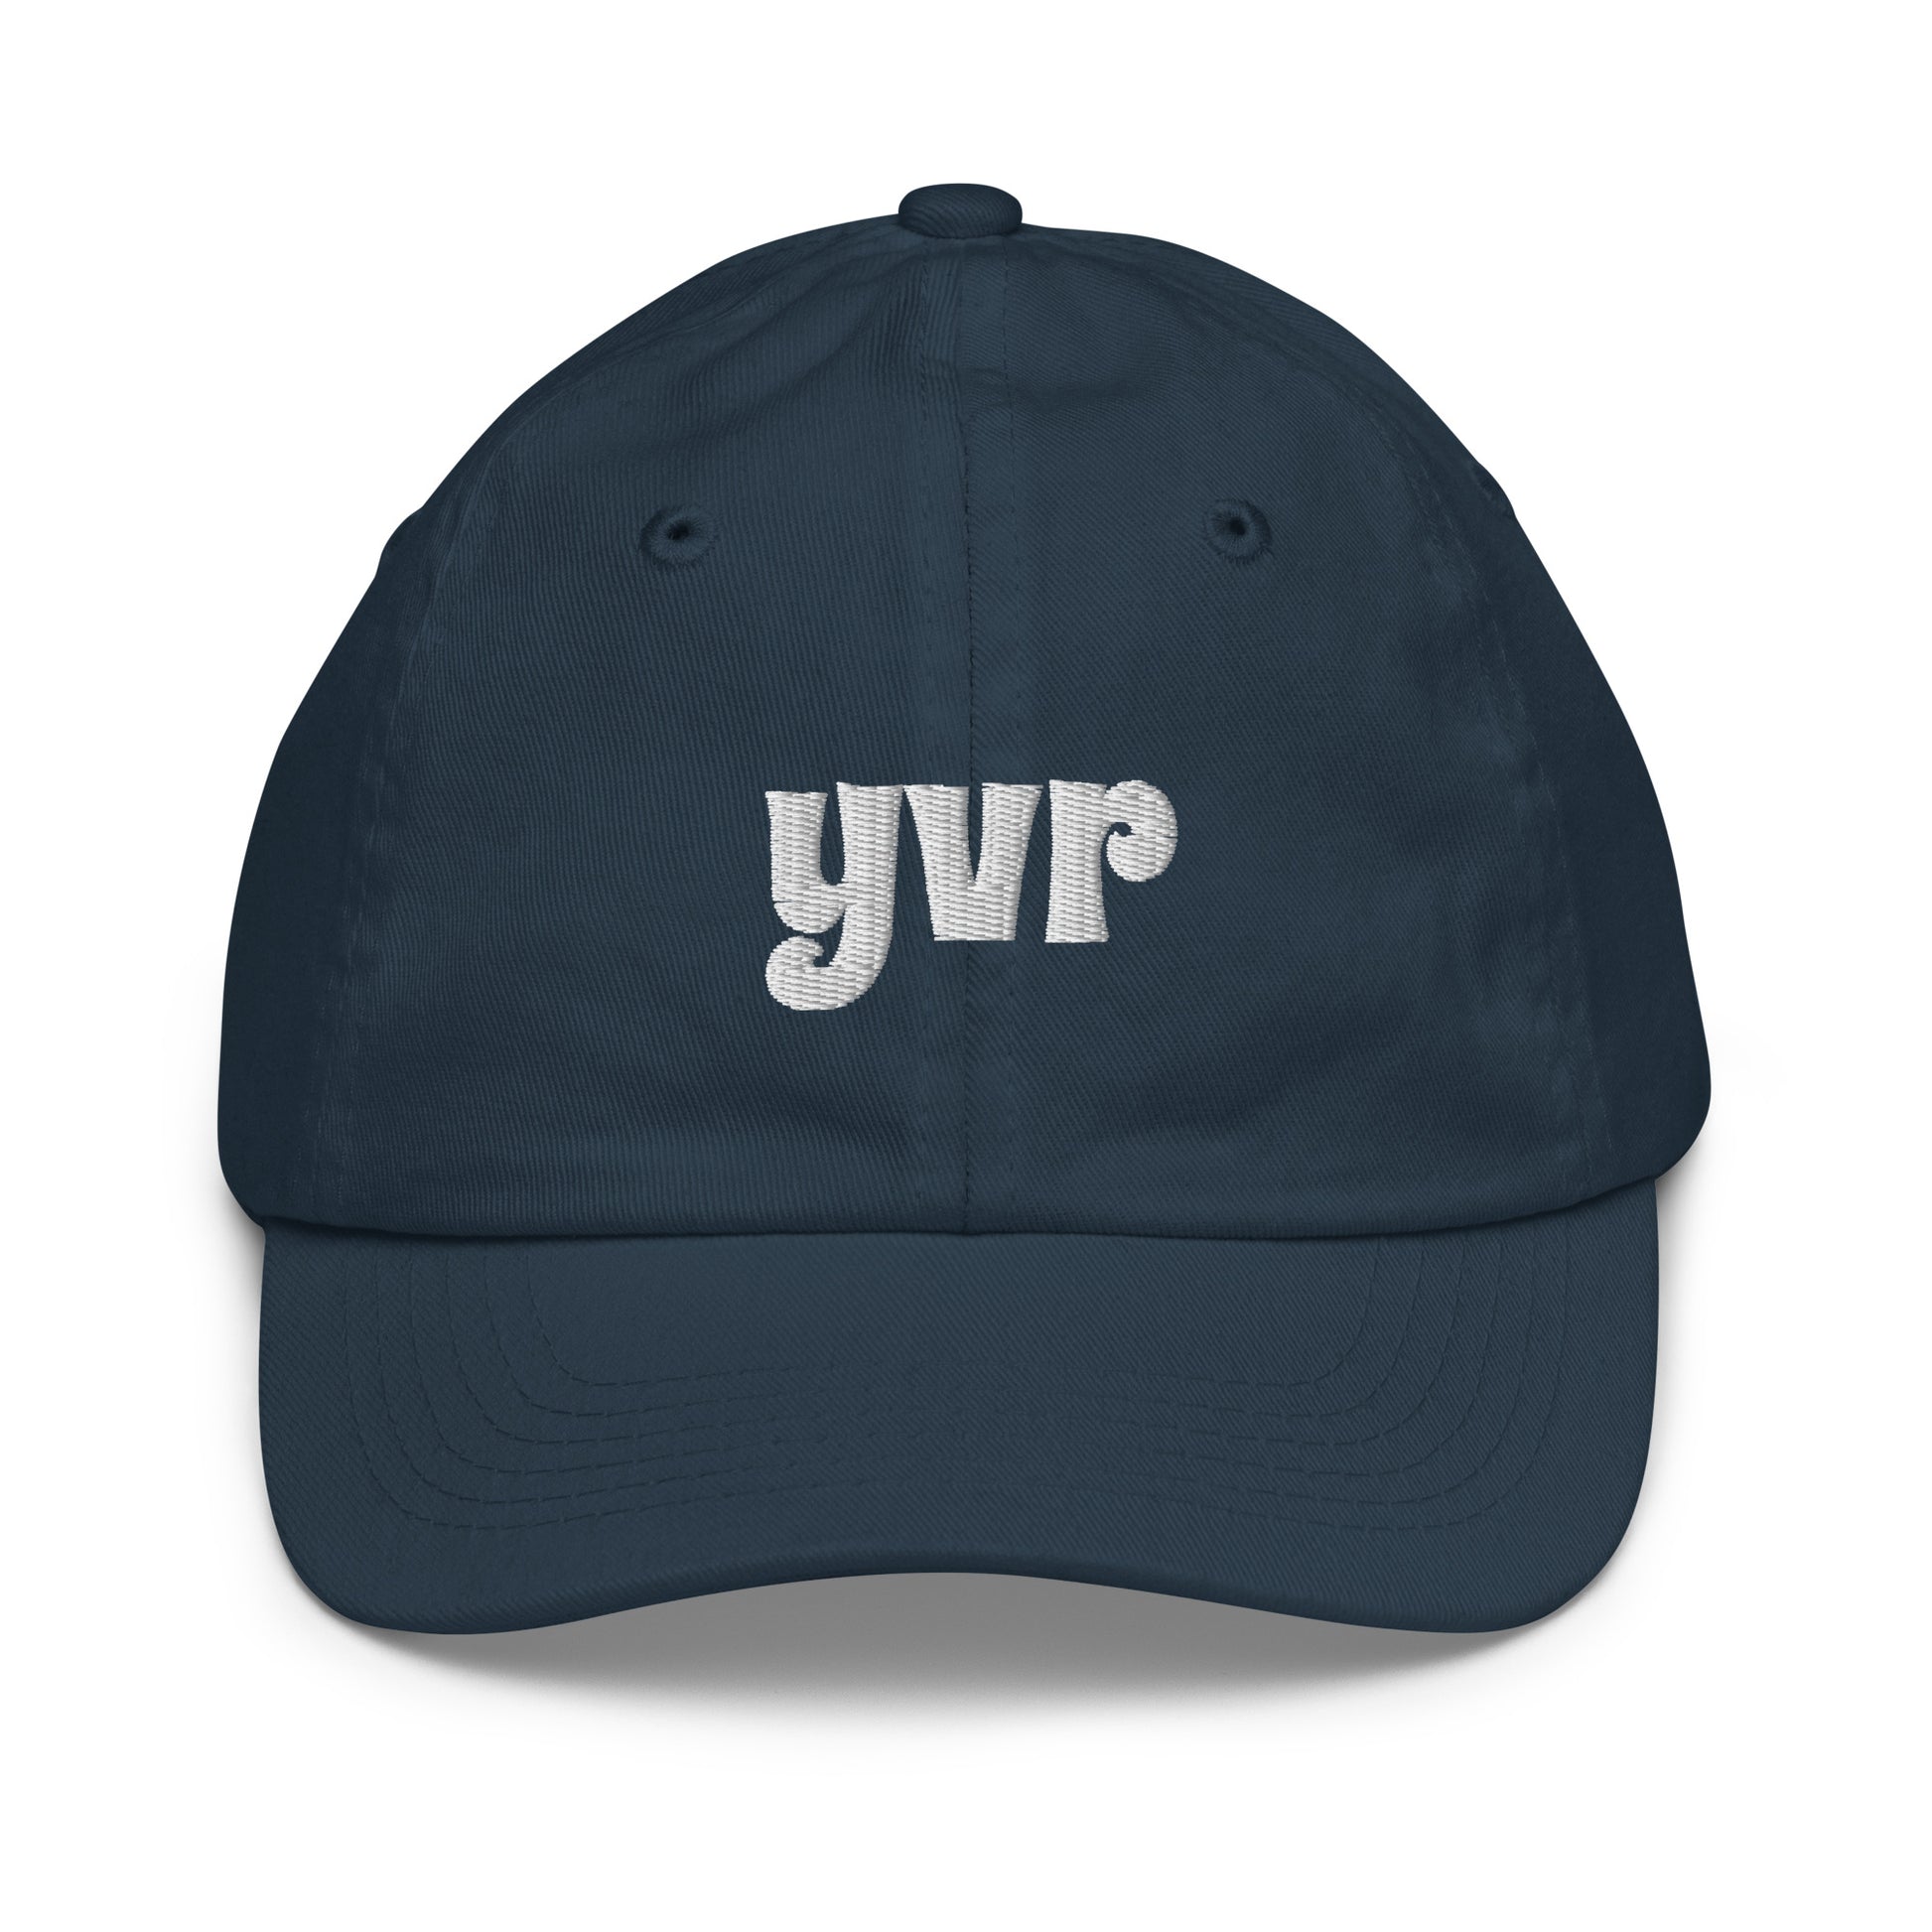 Groovy Kid's Baseball Cap - White • YVR Vancouver • YHM Designs - Image 12